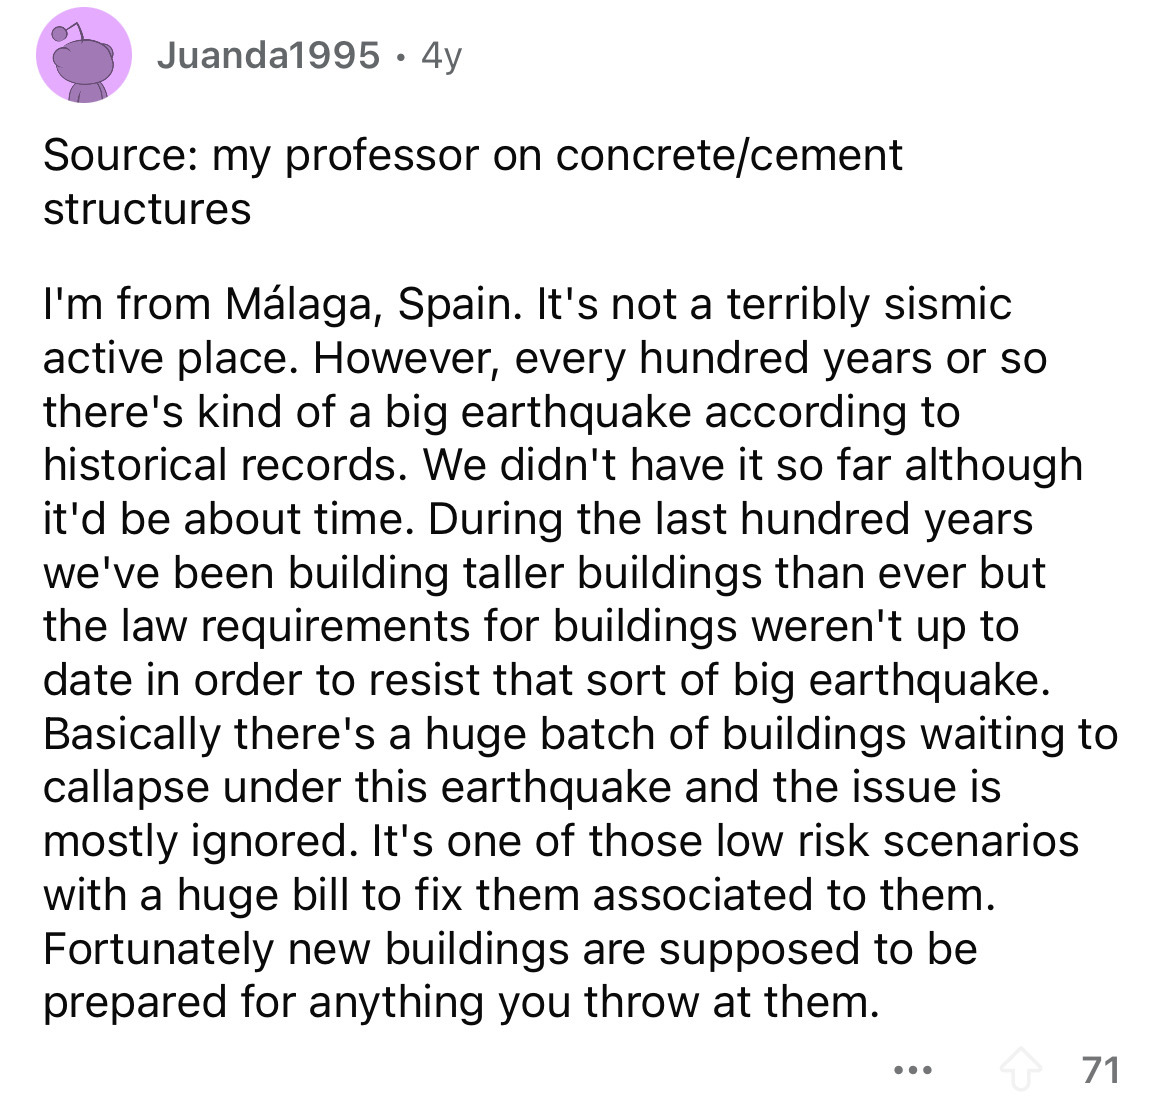 document - Juanda1995 4y Source my professor on concretecement structures I'm from Mlaga, Spain. It's not a terribly sismic active place. However, every hundred years or so there's kind of a big earthquake according to historical records. We didn't have i